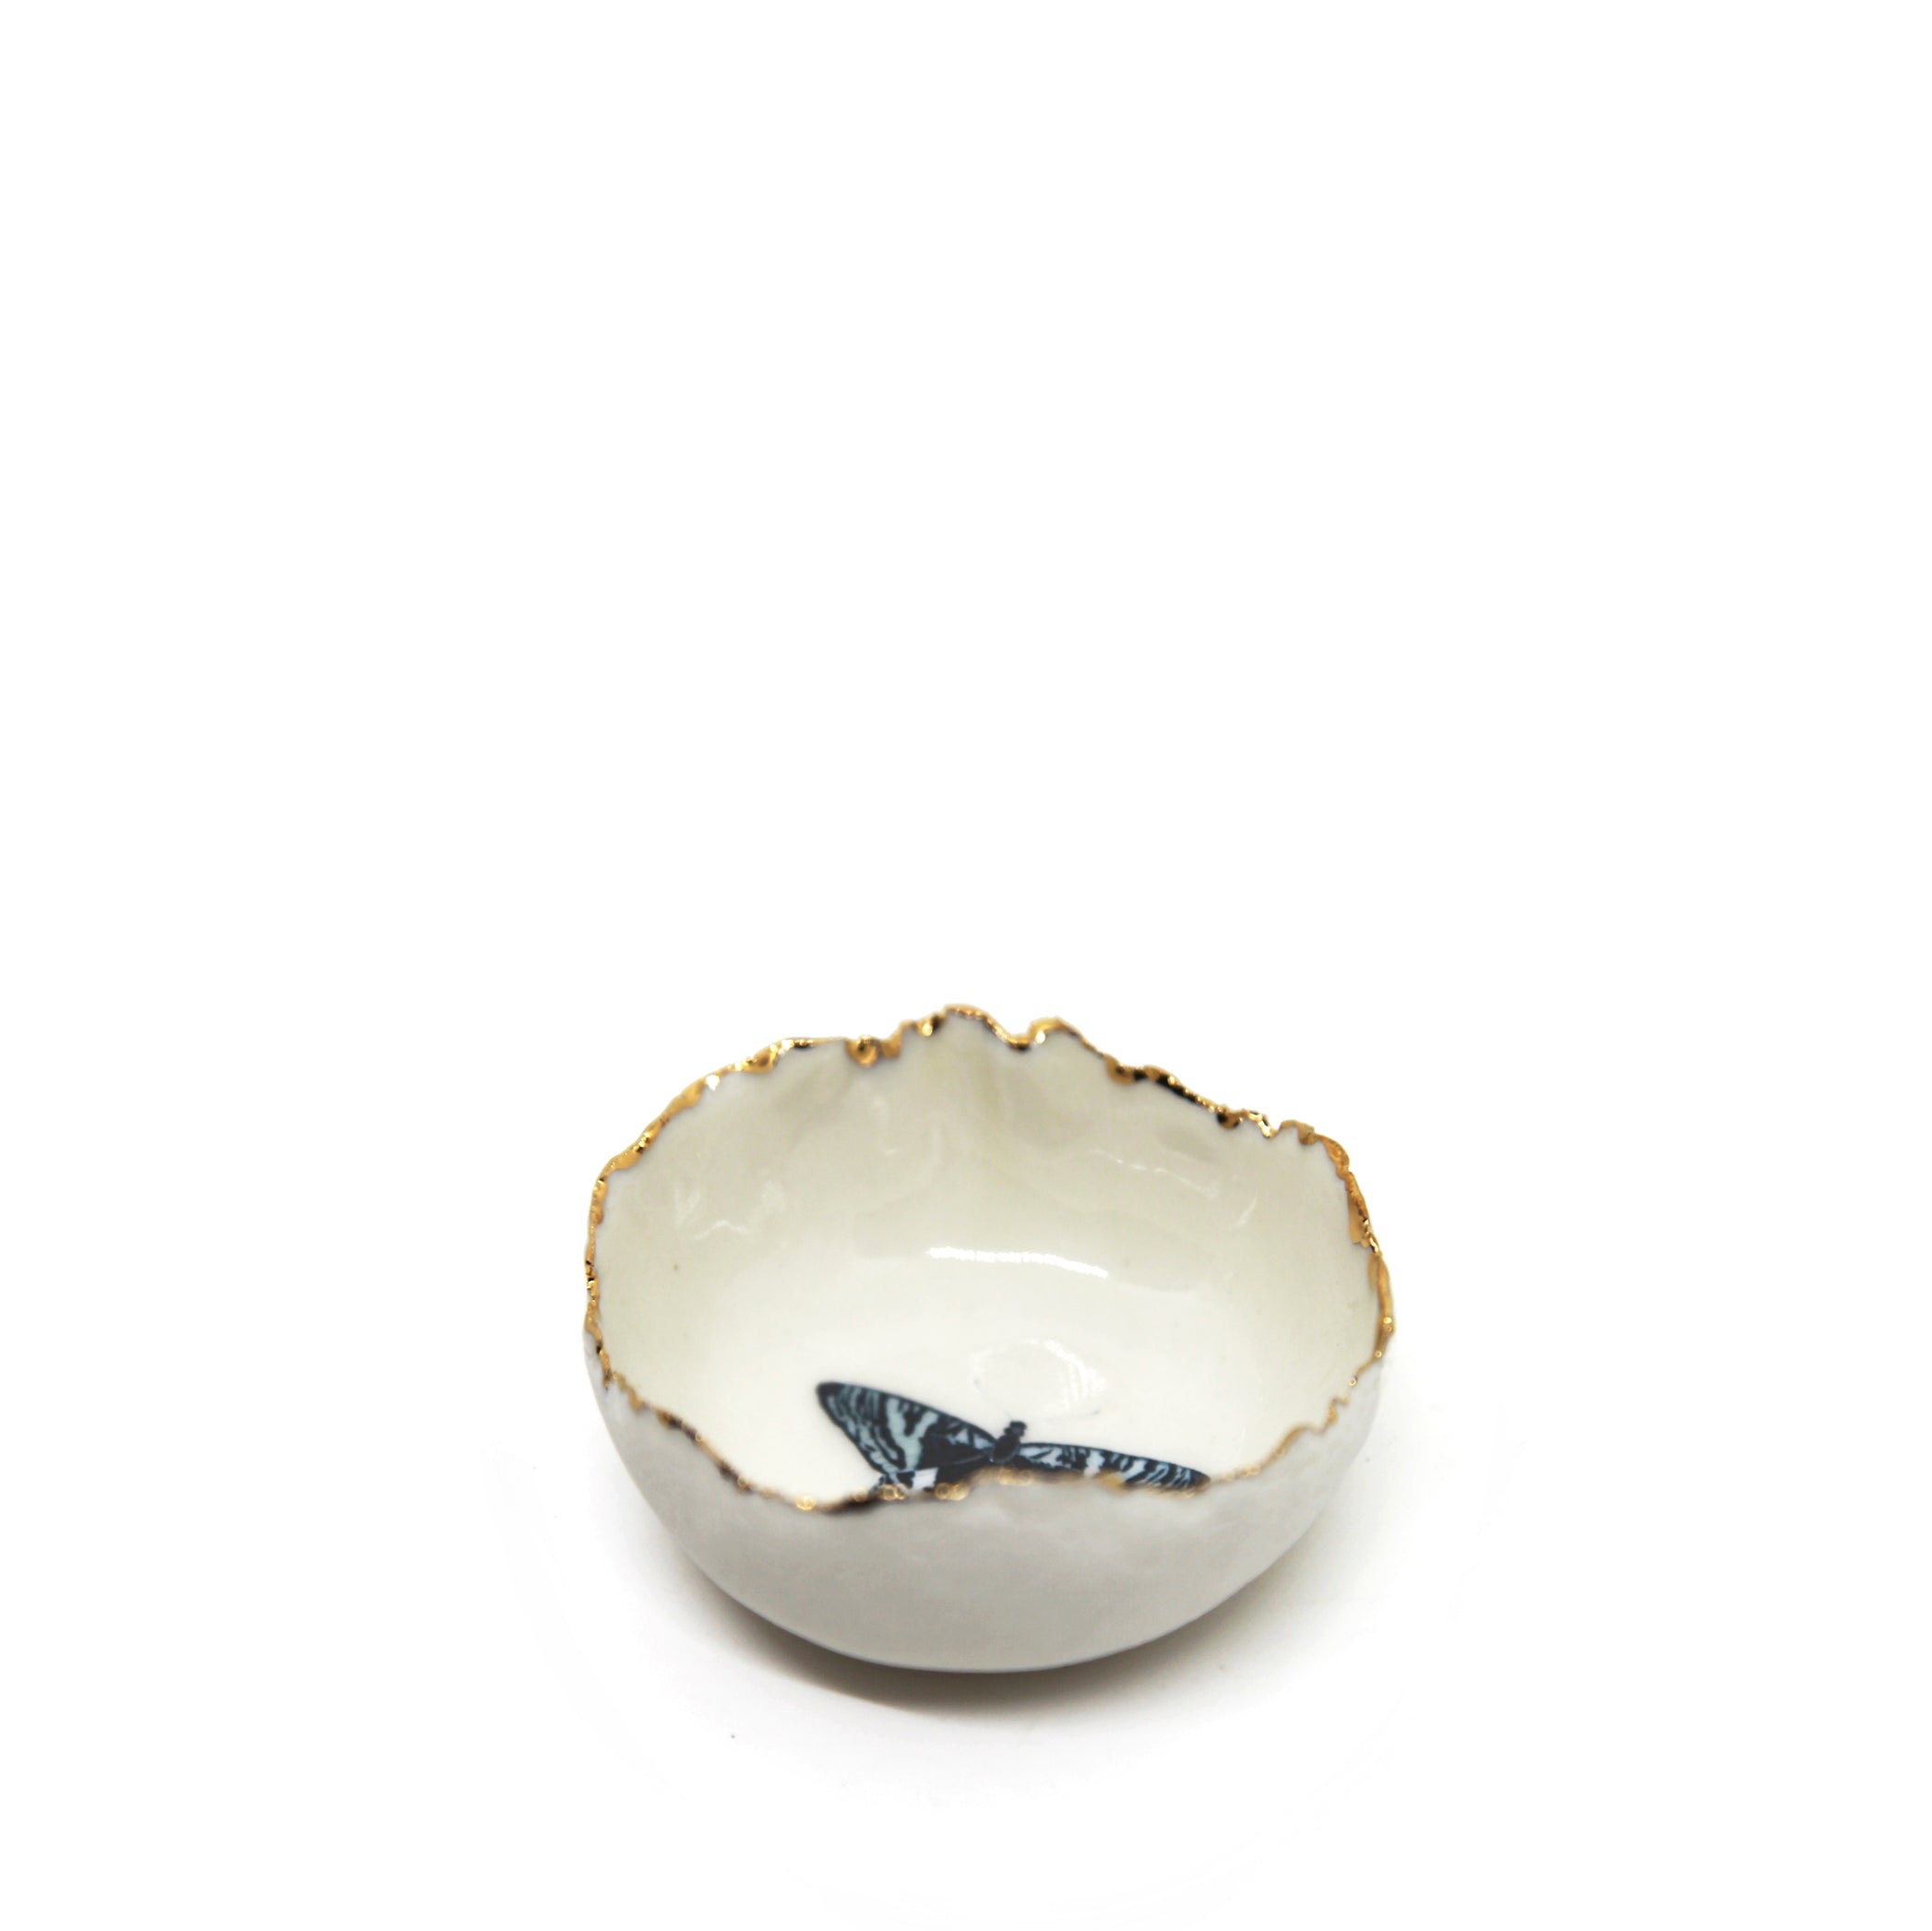 HB Jagged Bowl with Coloured Butterfly, 7cm